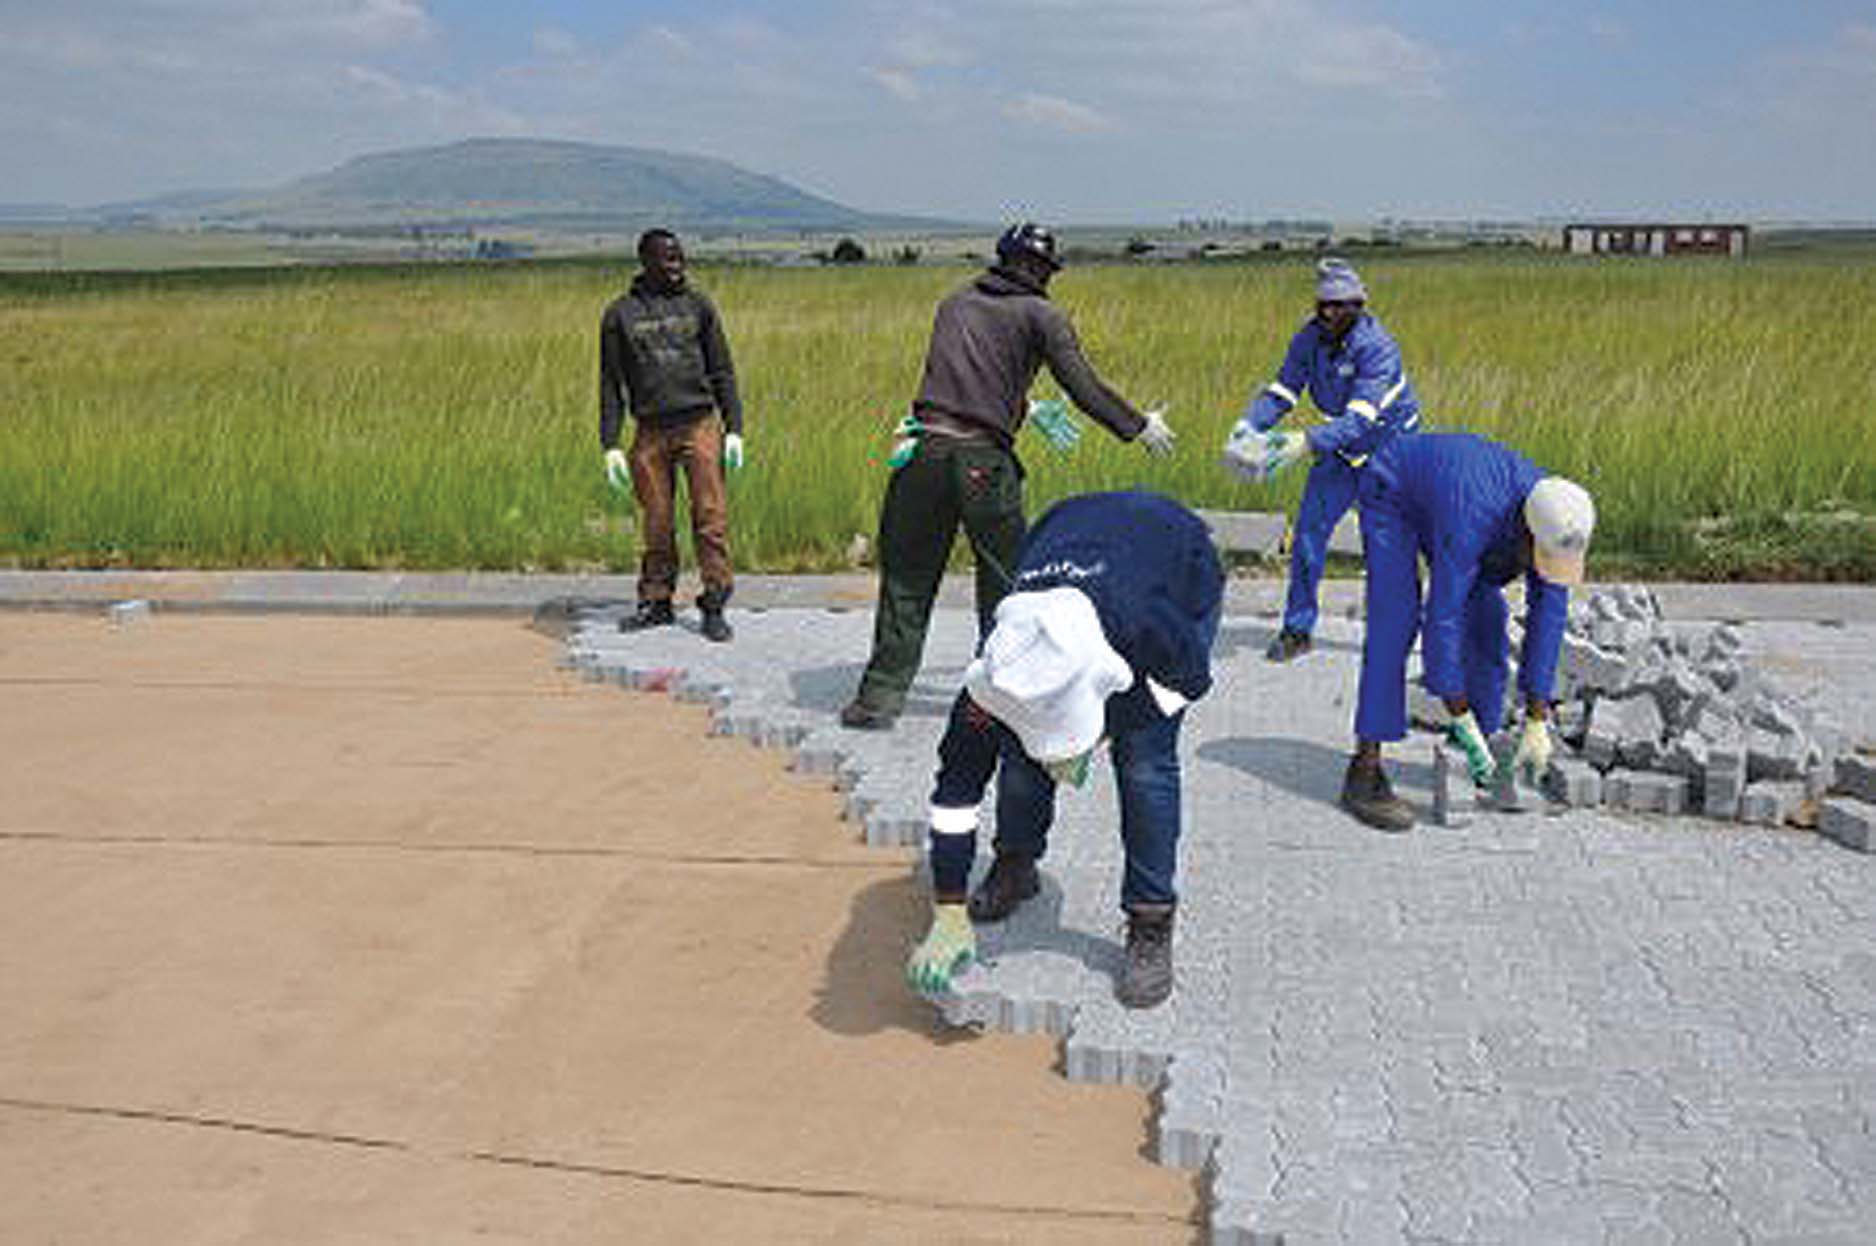 use of concrete block paving in Zambia 